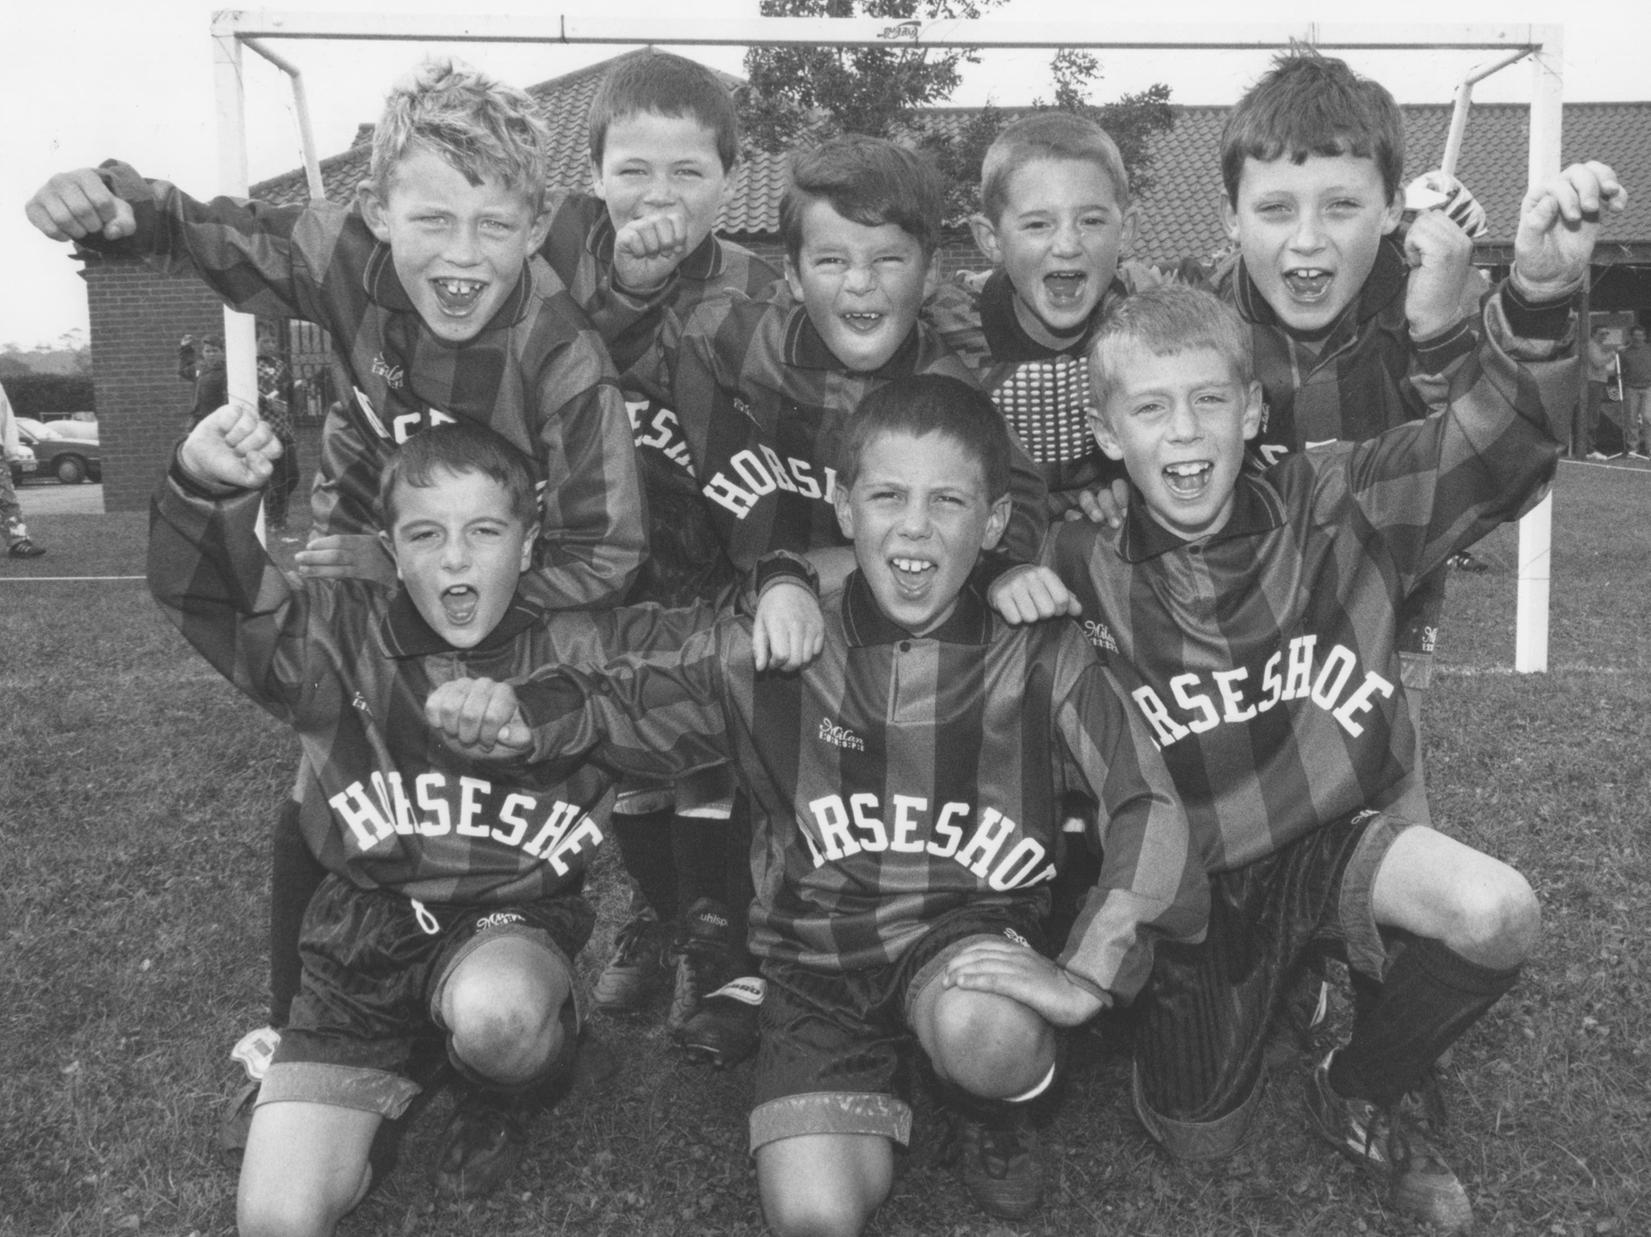 At the Hunmanby Junior School Tournament in September 1997 the under nines team are pictured before their semi final clash. Back, left, Jamie Fletcher, Nathan O'Toole, Jonathan Jaconelli, Shane Scott, matthew Hewitt; front, left, Craig Hardcastle, Simon Hunter, Cameron Dobson.